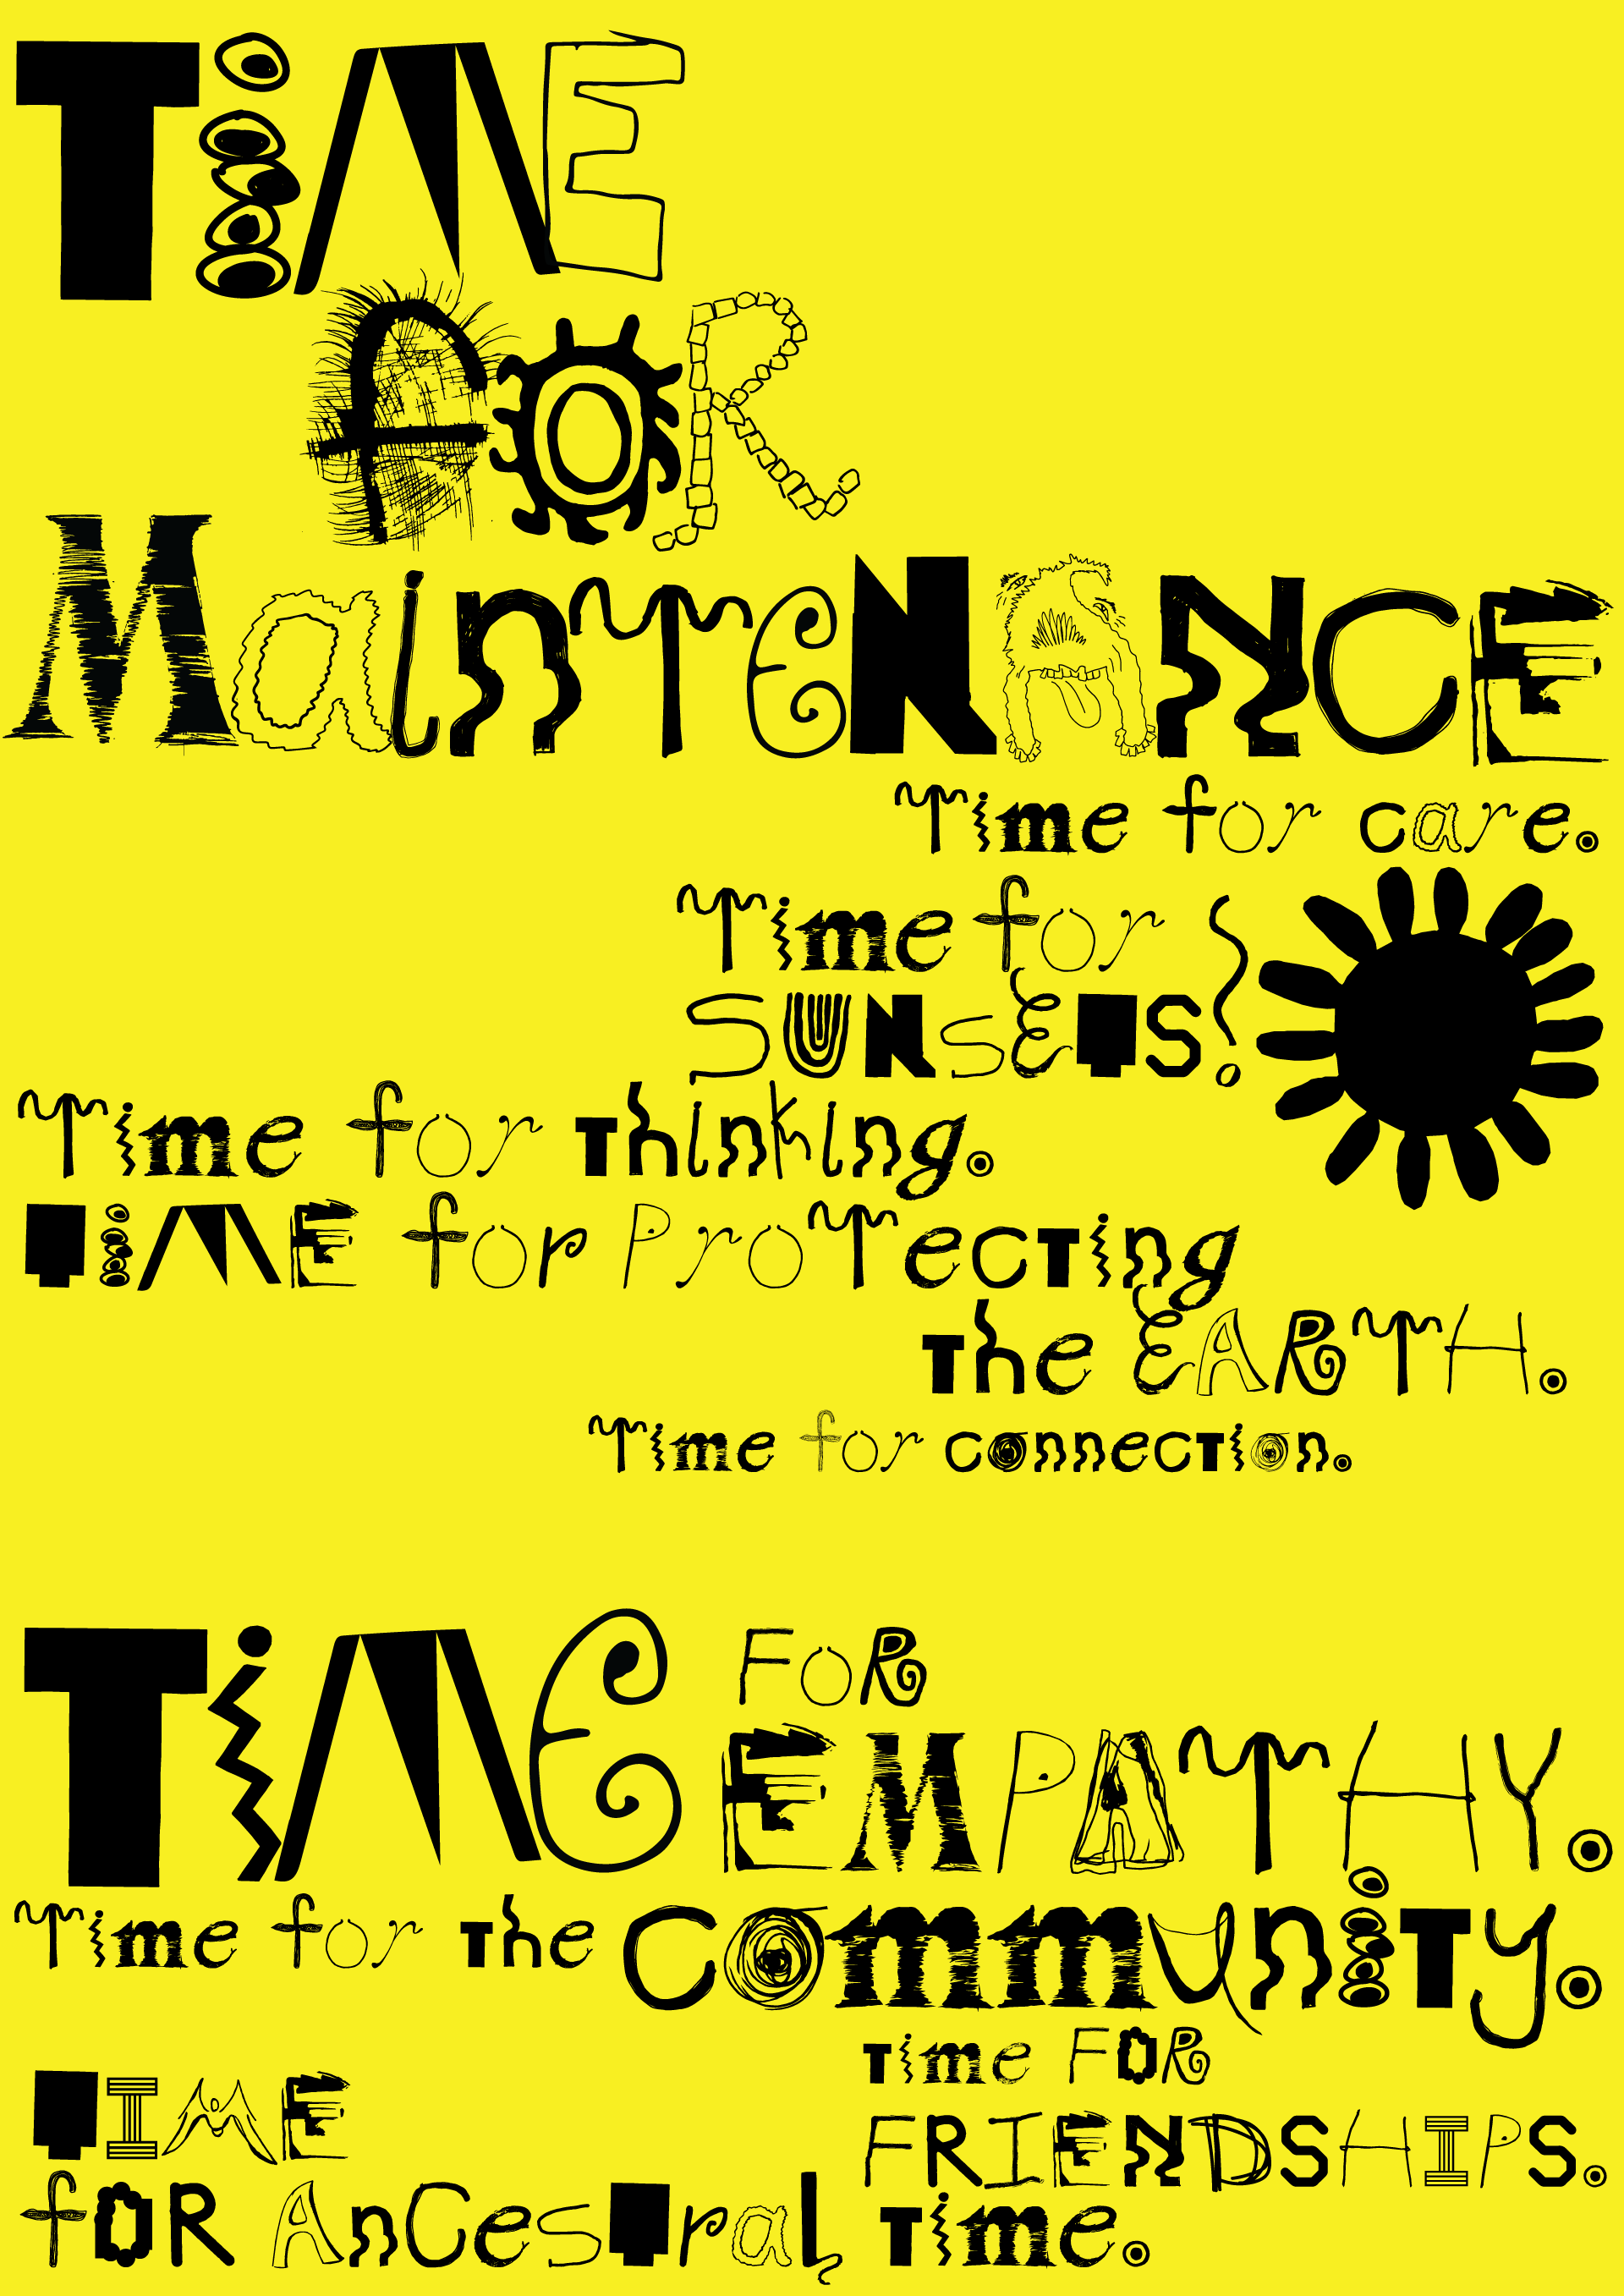 yellow poster manifesto featuring ideas and statements